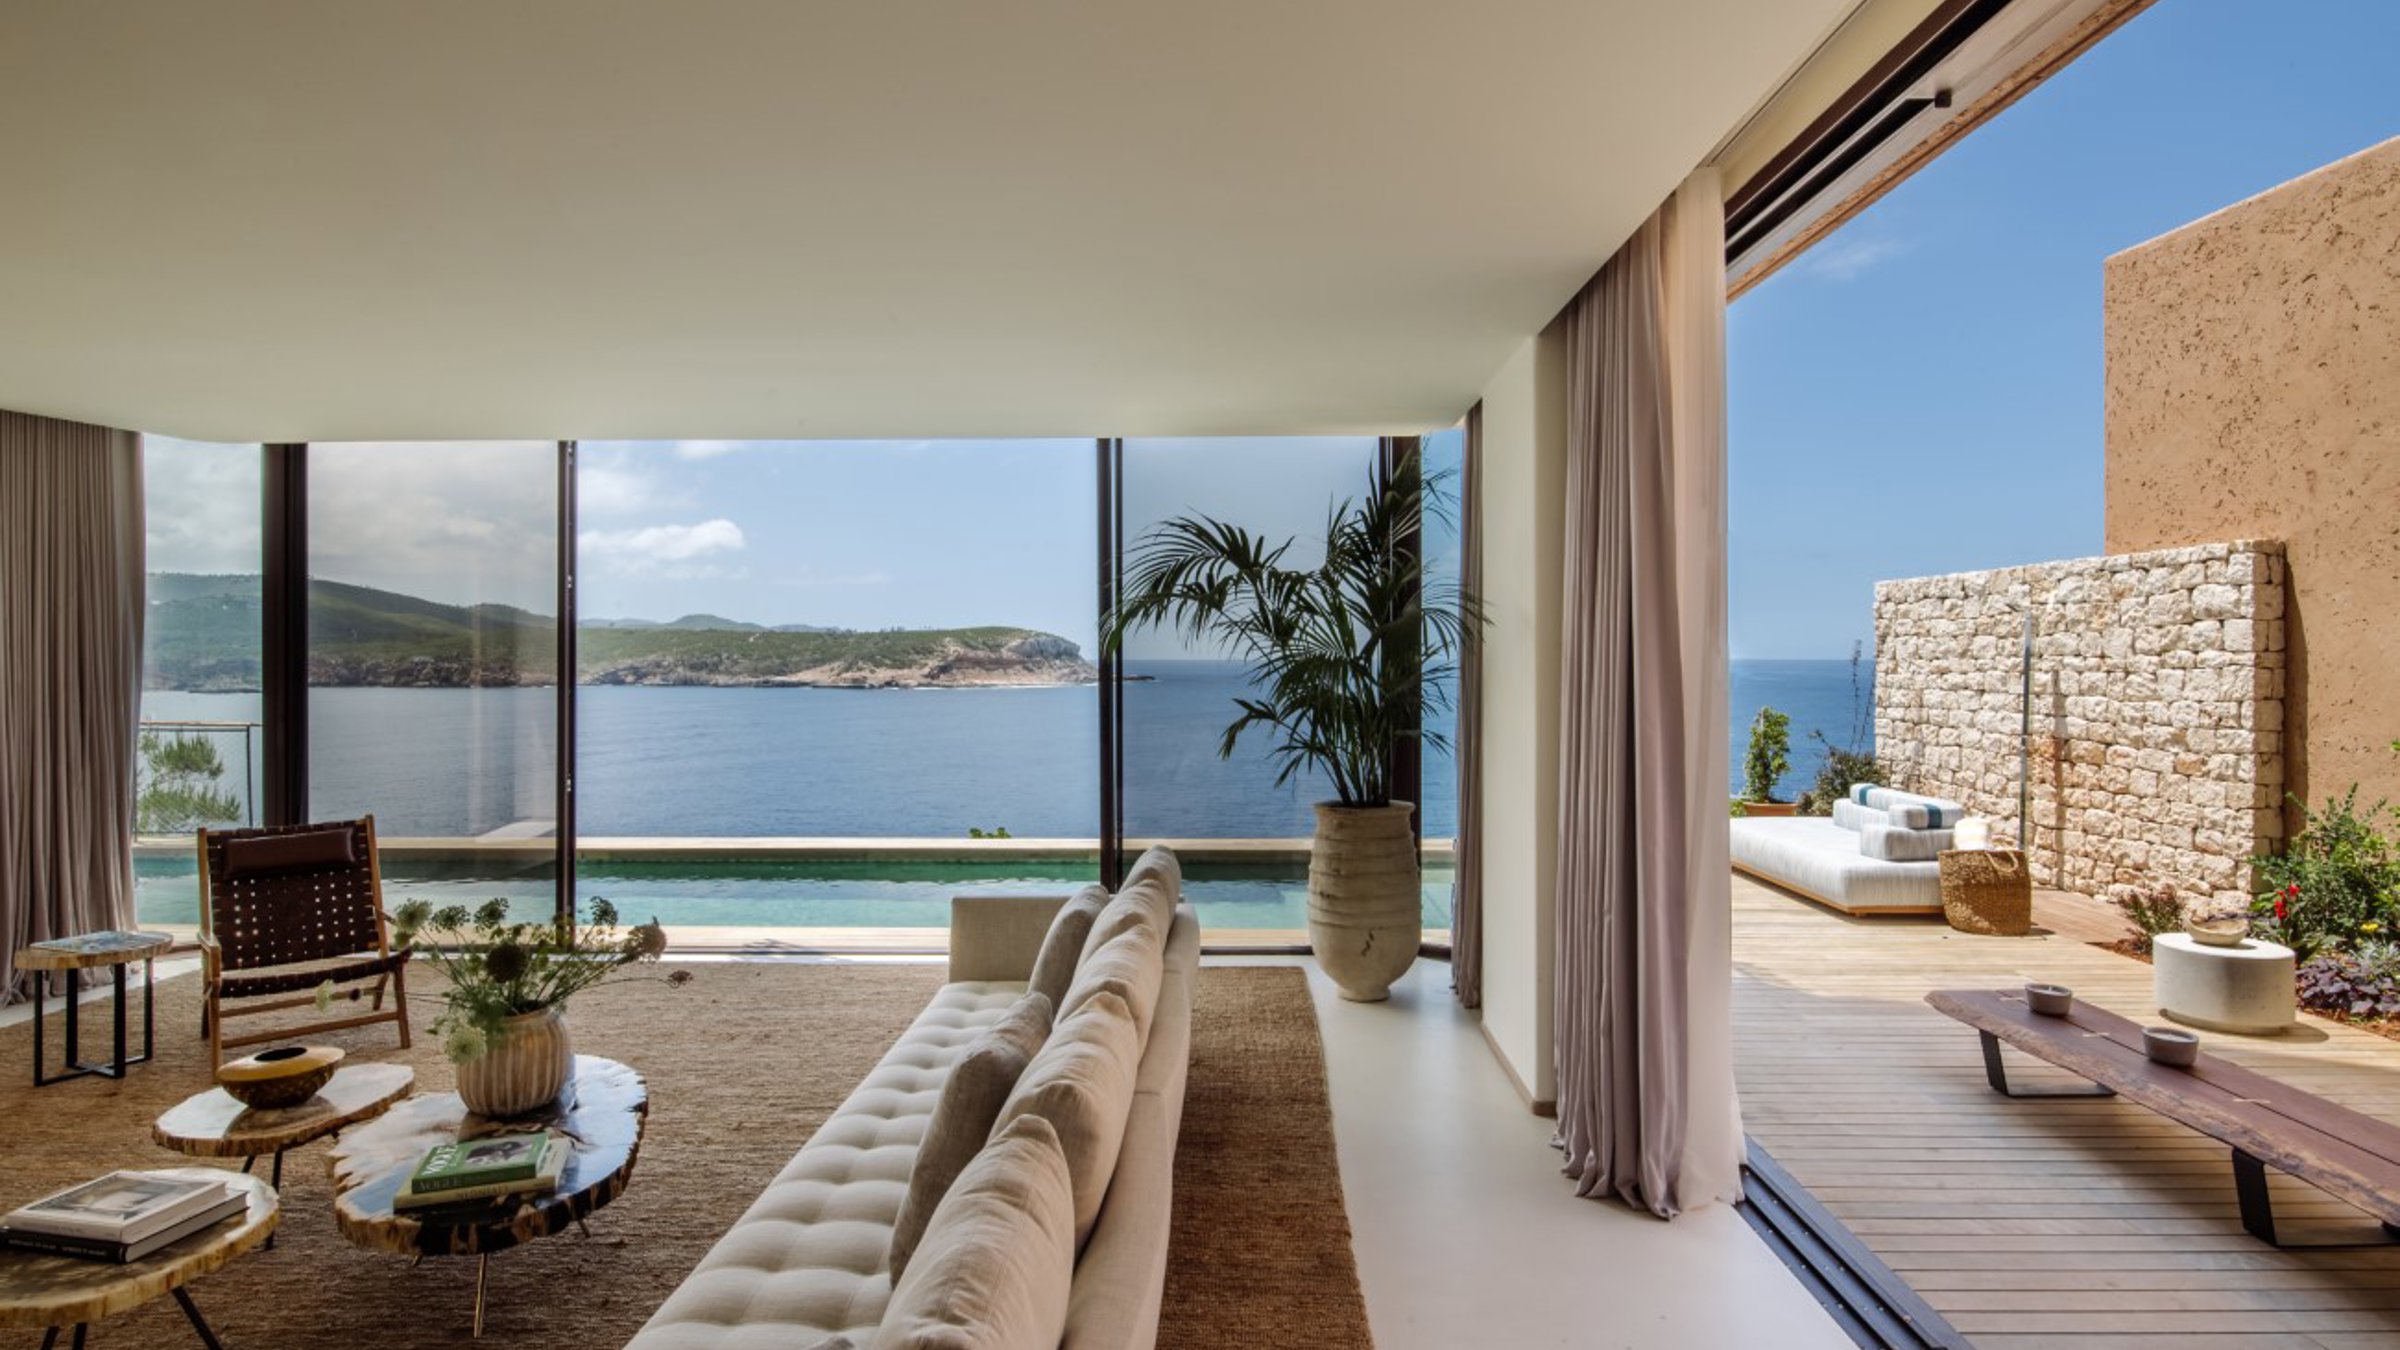 Living Room And Terrace With Sea Views